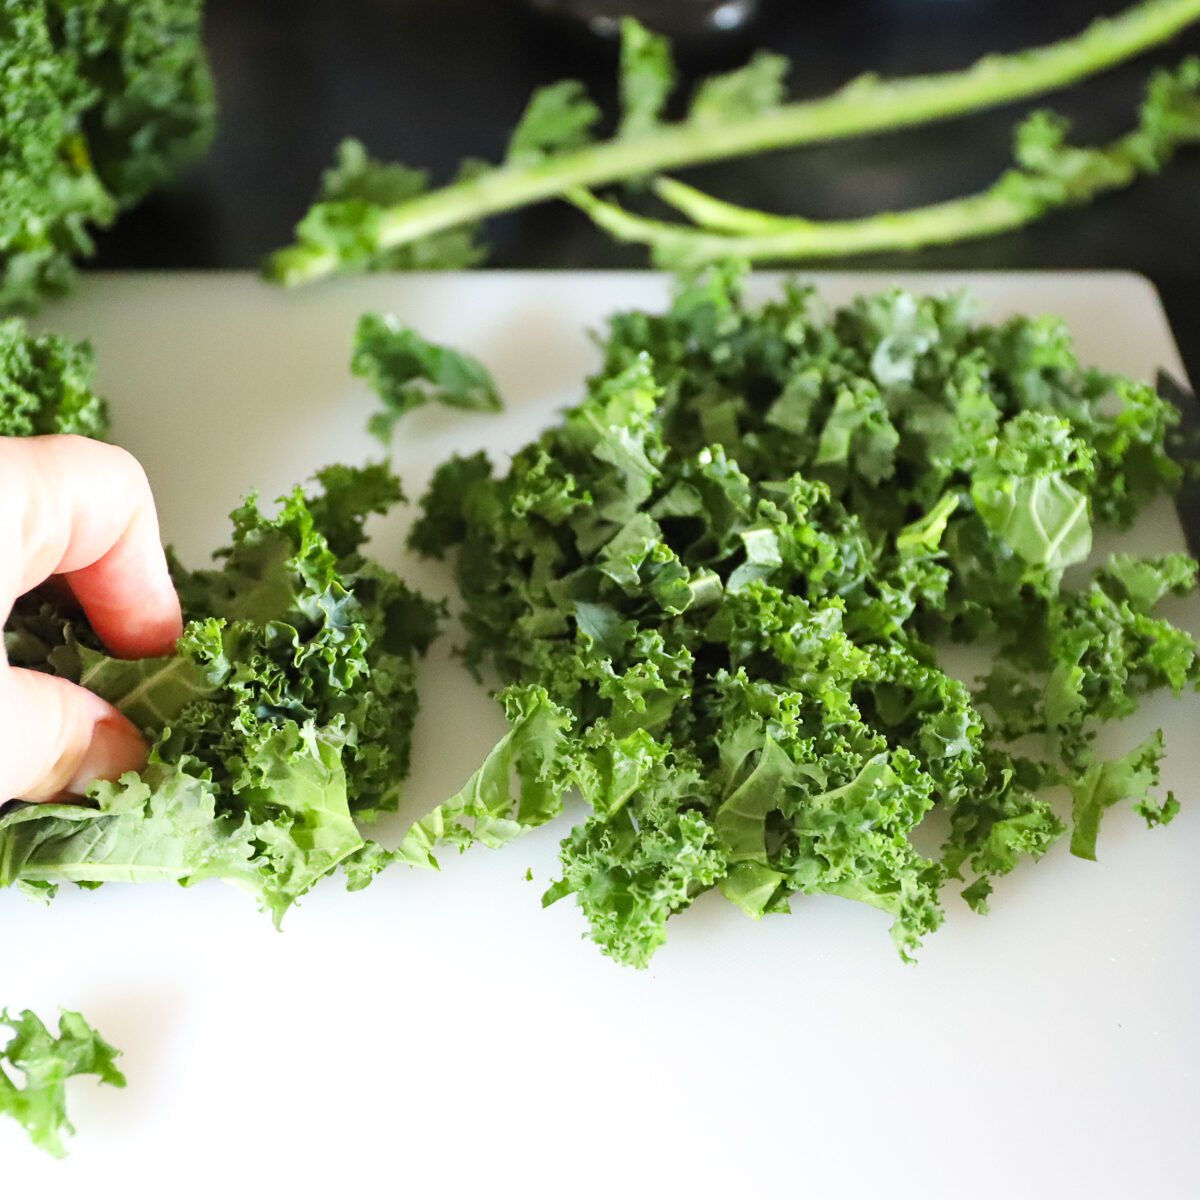 The kale getting finely chopped for slaw. The center stems (ribs) are cut off and in the background.